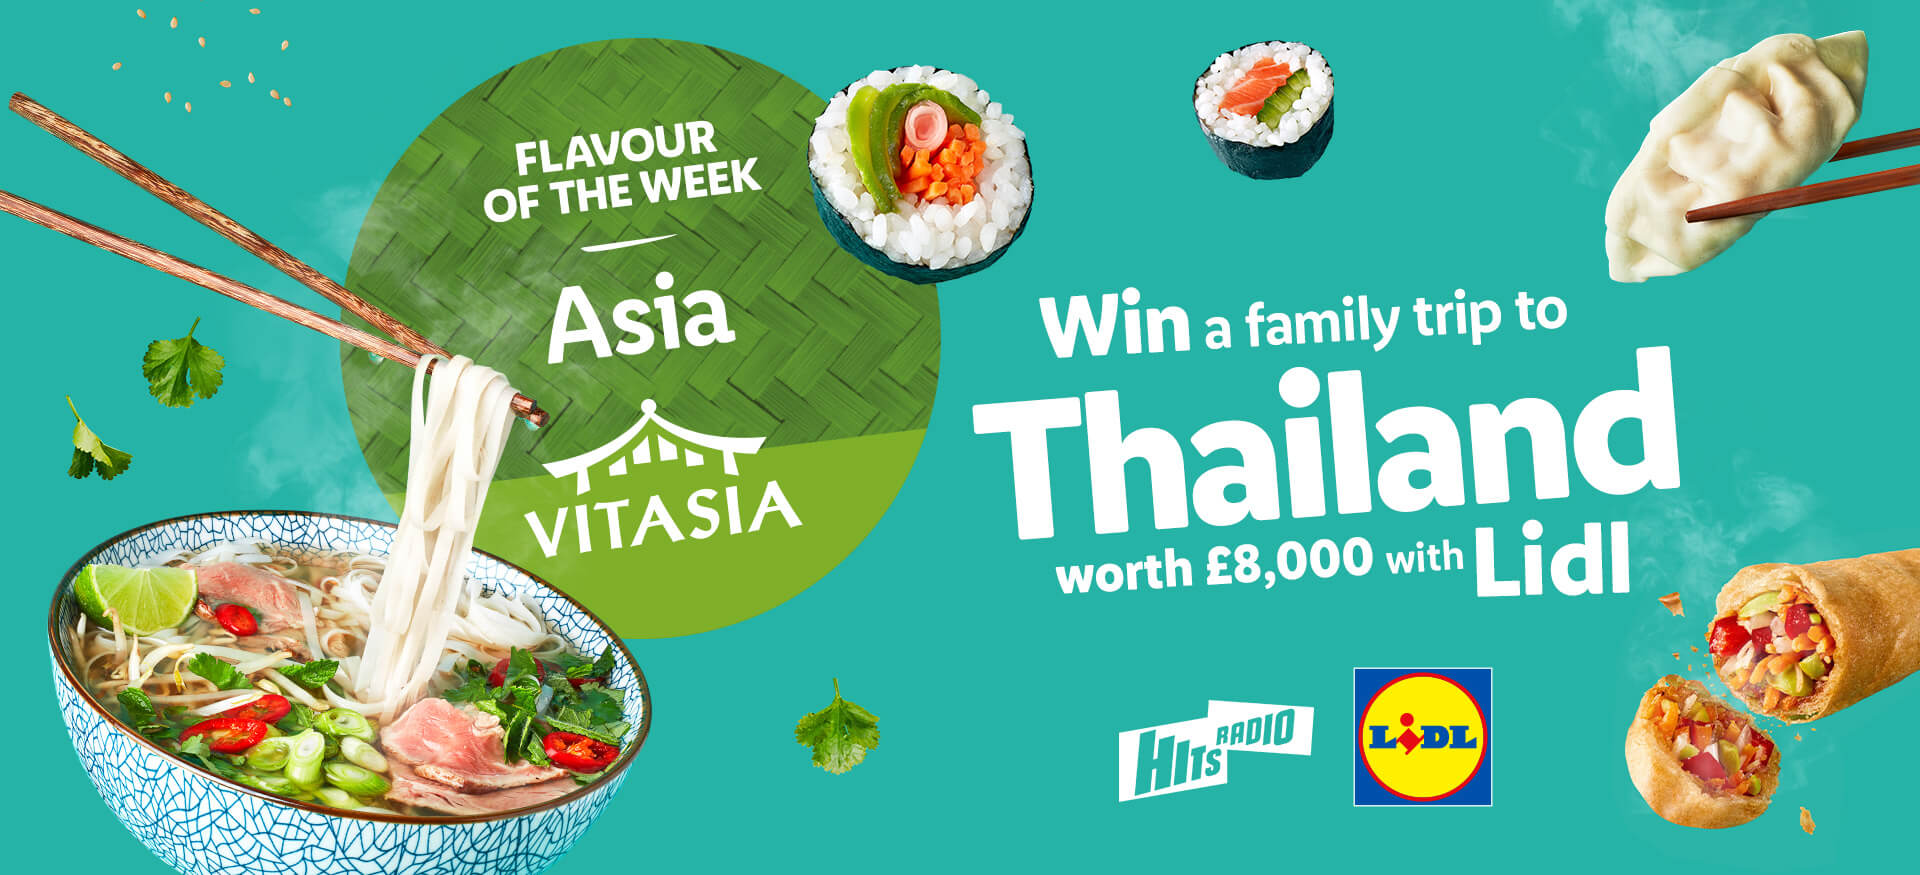 Win a family trip to Thailand with Lidl and Hits Radio